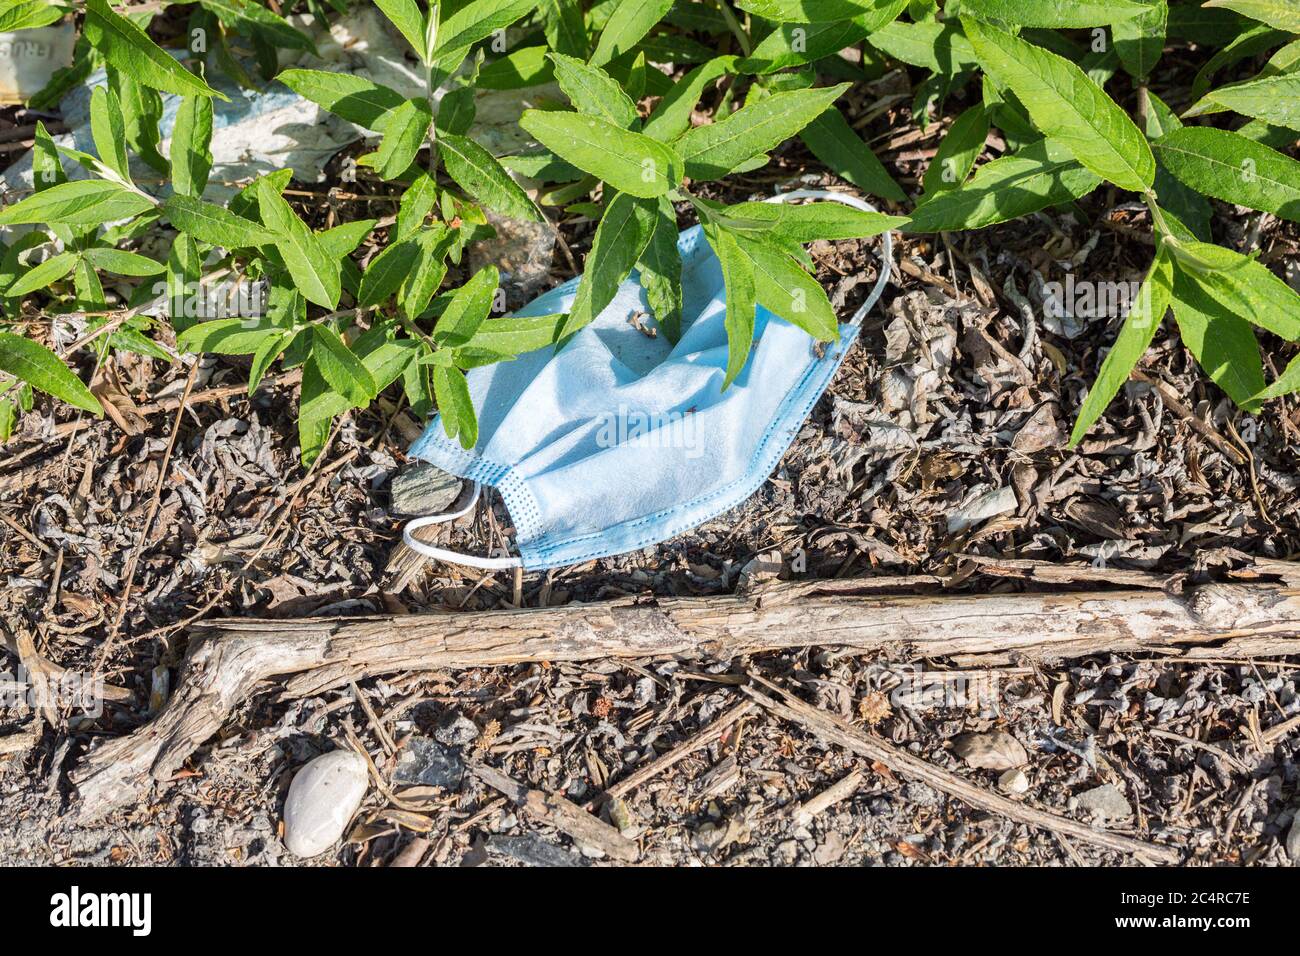 Used face mask on brown soil. Partly covered by plants. Lost or thrown away. Stock Photo